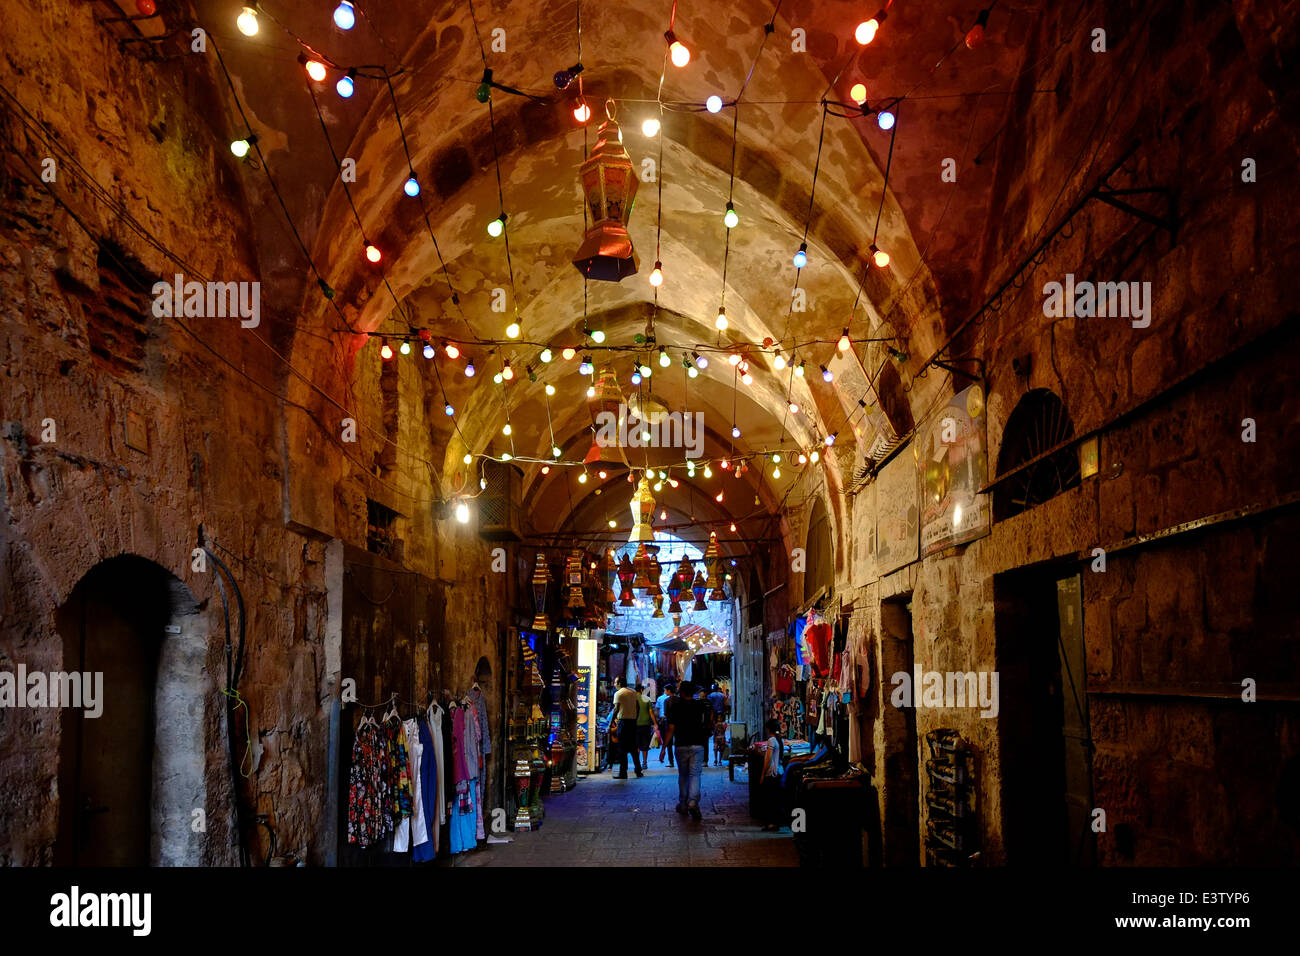 Israel, Jerusalem. 29th June, 2014. An alley in the Muslim Quarter with festive lights during the Muslim holy month of Ramadan in the Old City of Jerusalem on 29 June 2014.  Muslims worldwide observe Ramadan as a month of fasting and it is regarded as one of the Five Pillars of Islam. Credit:  Eddie Gerald/Alamy Live News Stock Photo